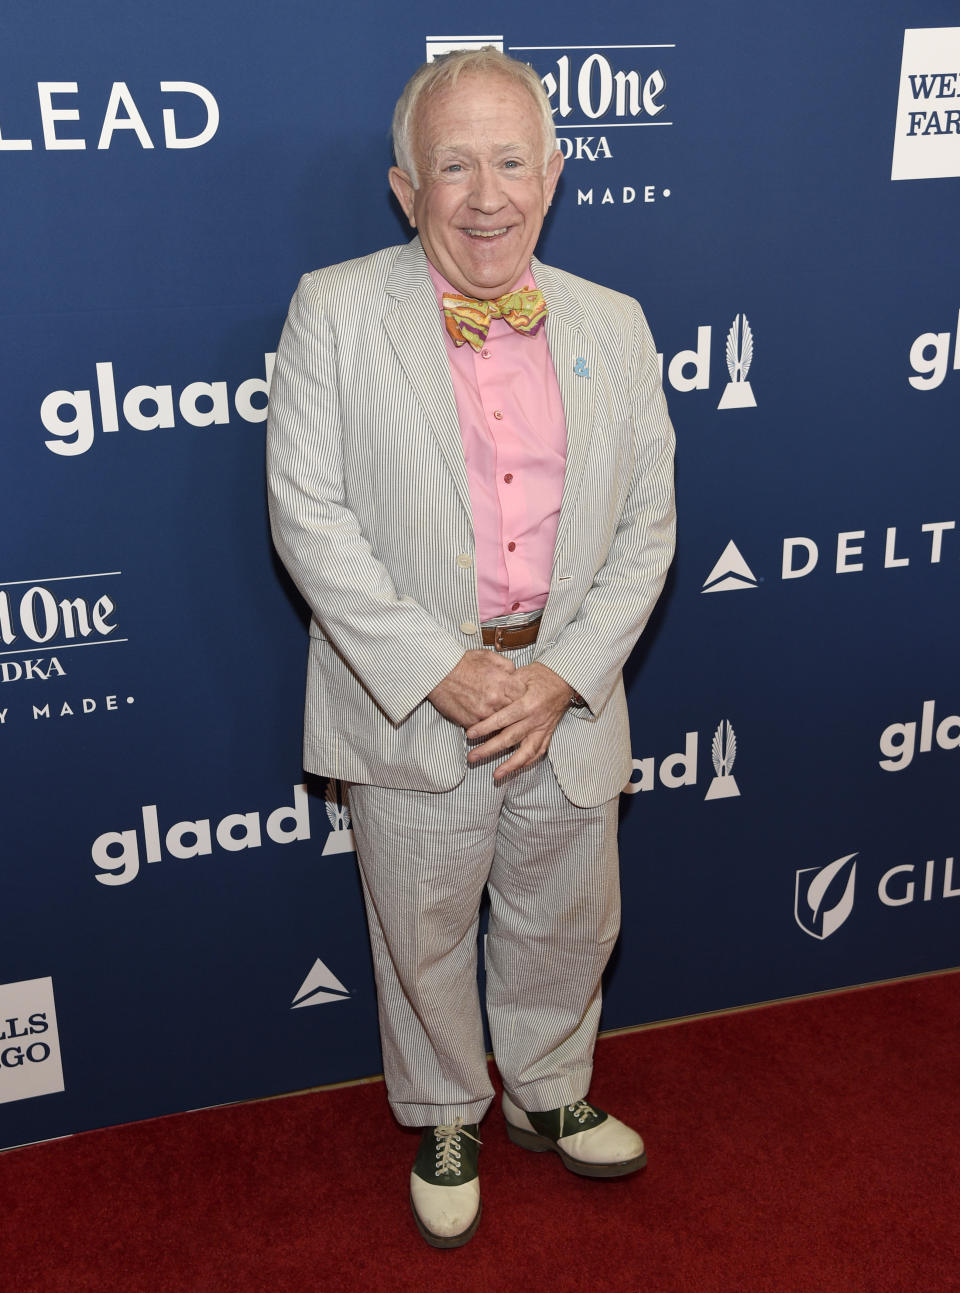 FILE - Leslie Jordan arrives at the 29th annual GLAAD Media Awards at the Beverly Hilton Hotel on April 12, 2018, in Beverly Hills, Calif. Jordan, the Emmy-winning actor whose wry Southern drawl and versatility made him a comedy and drama standout on TV series including “Will & Grace” and “American Horror Story,” has died. He was 67. (Photo by Chris Pizzello/Invision/AP, File)